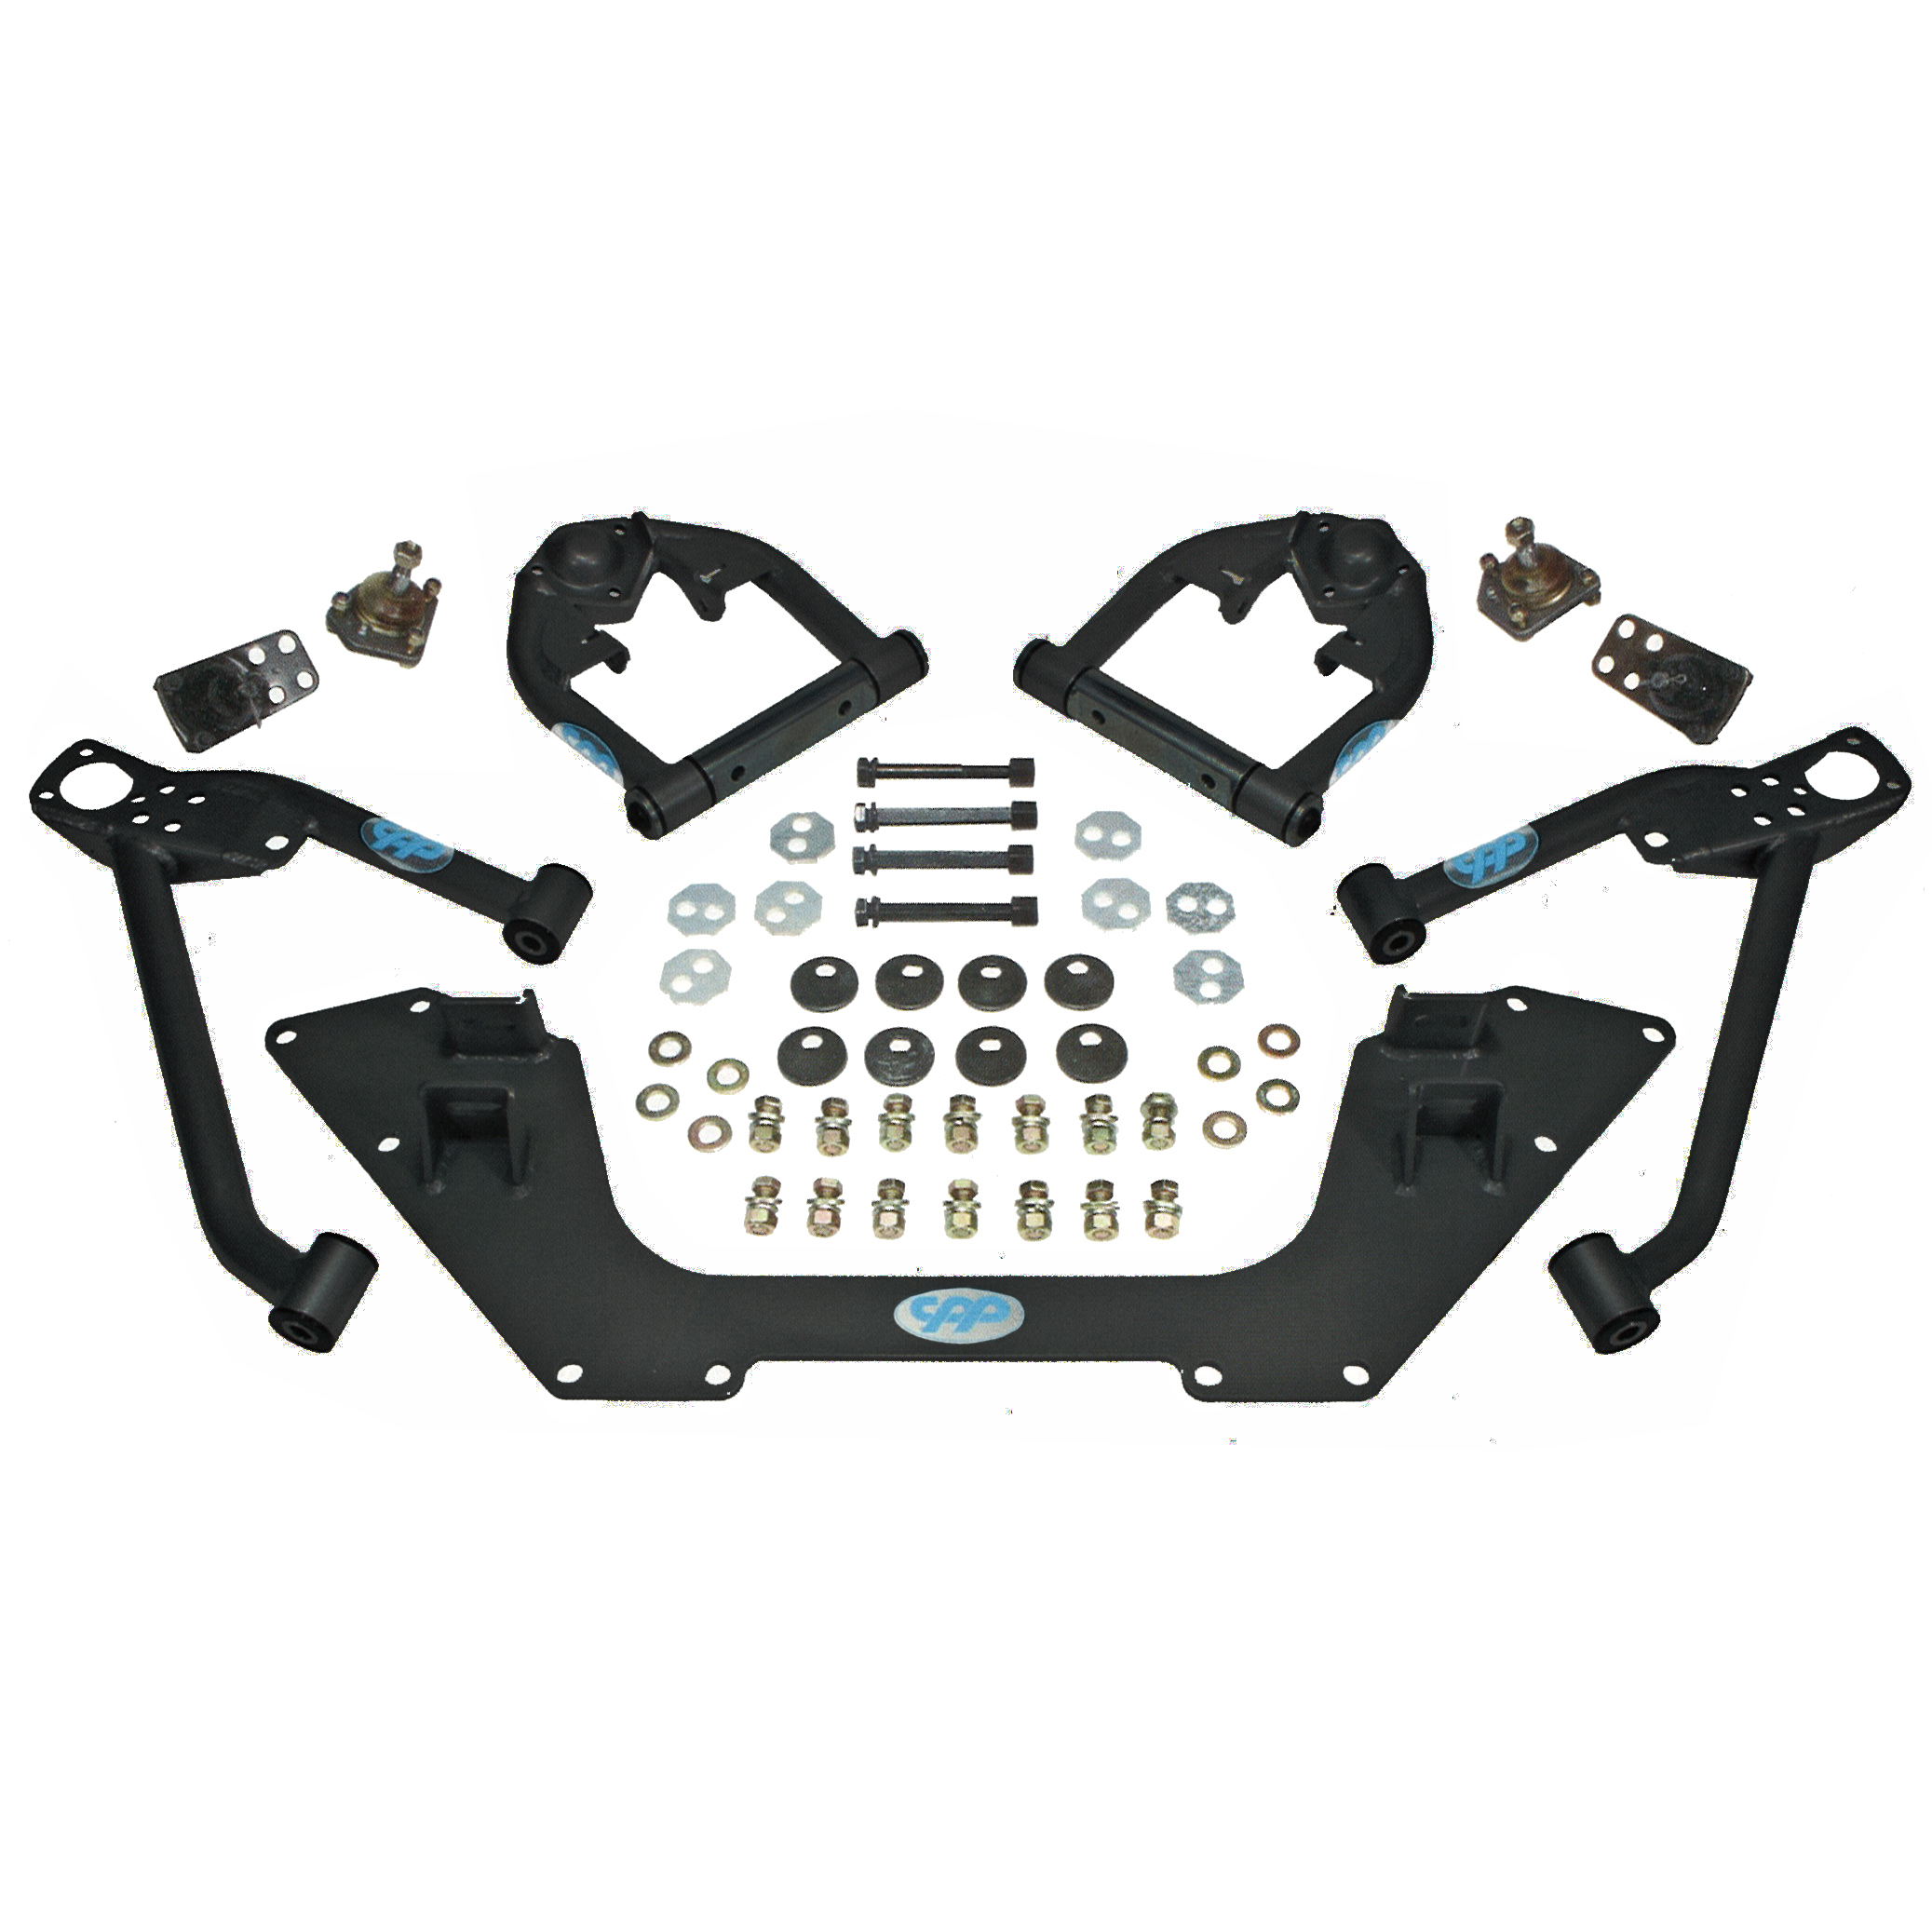 Classic Performance Front Subframe Kit for 1962-67 Chevy II/Nova.